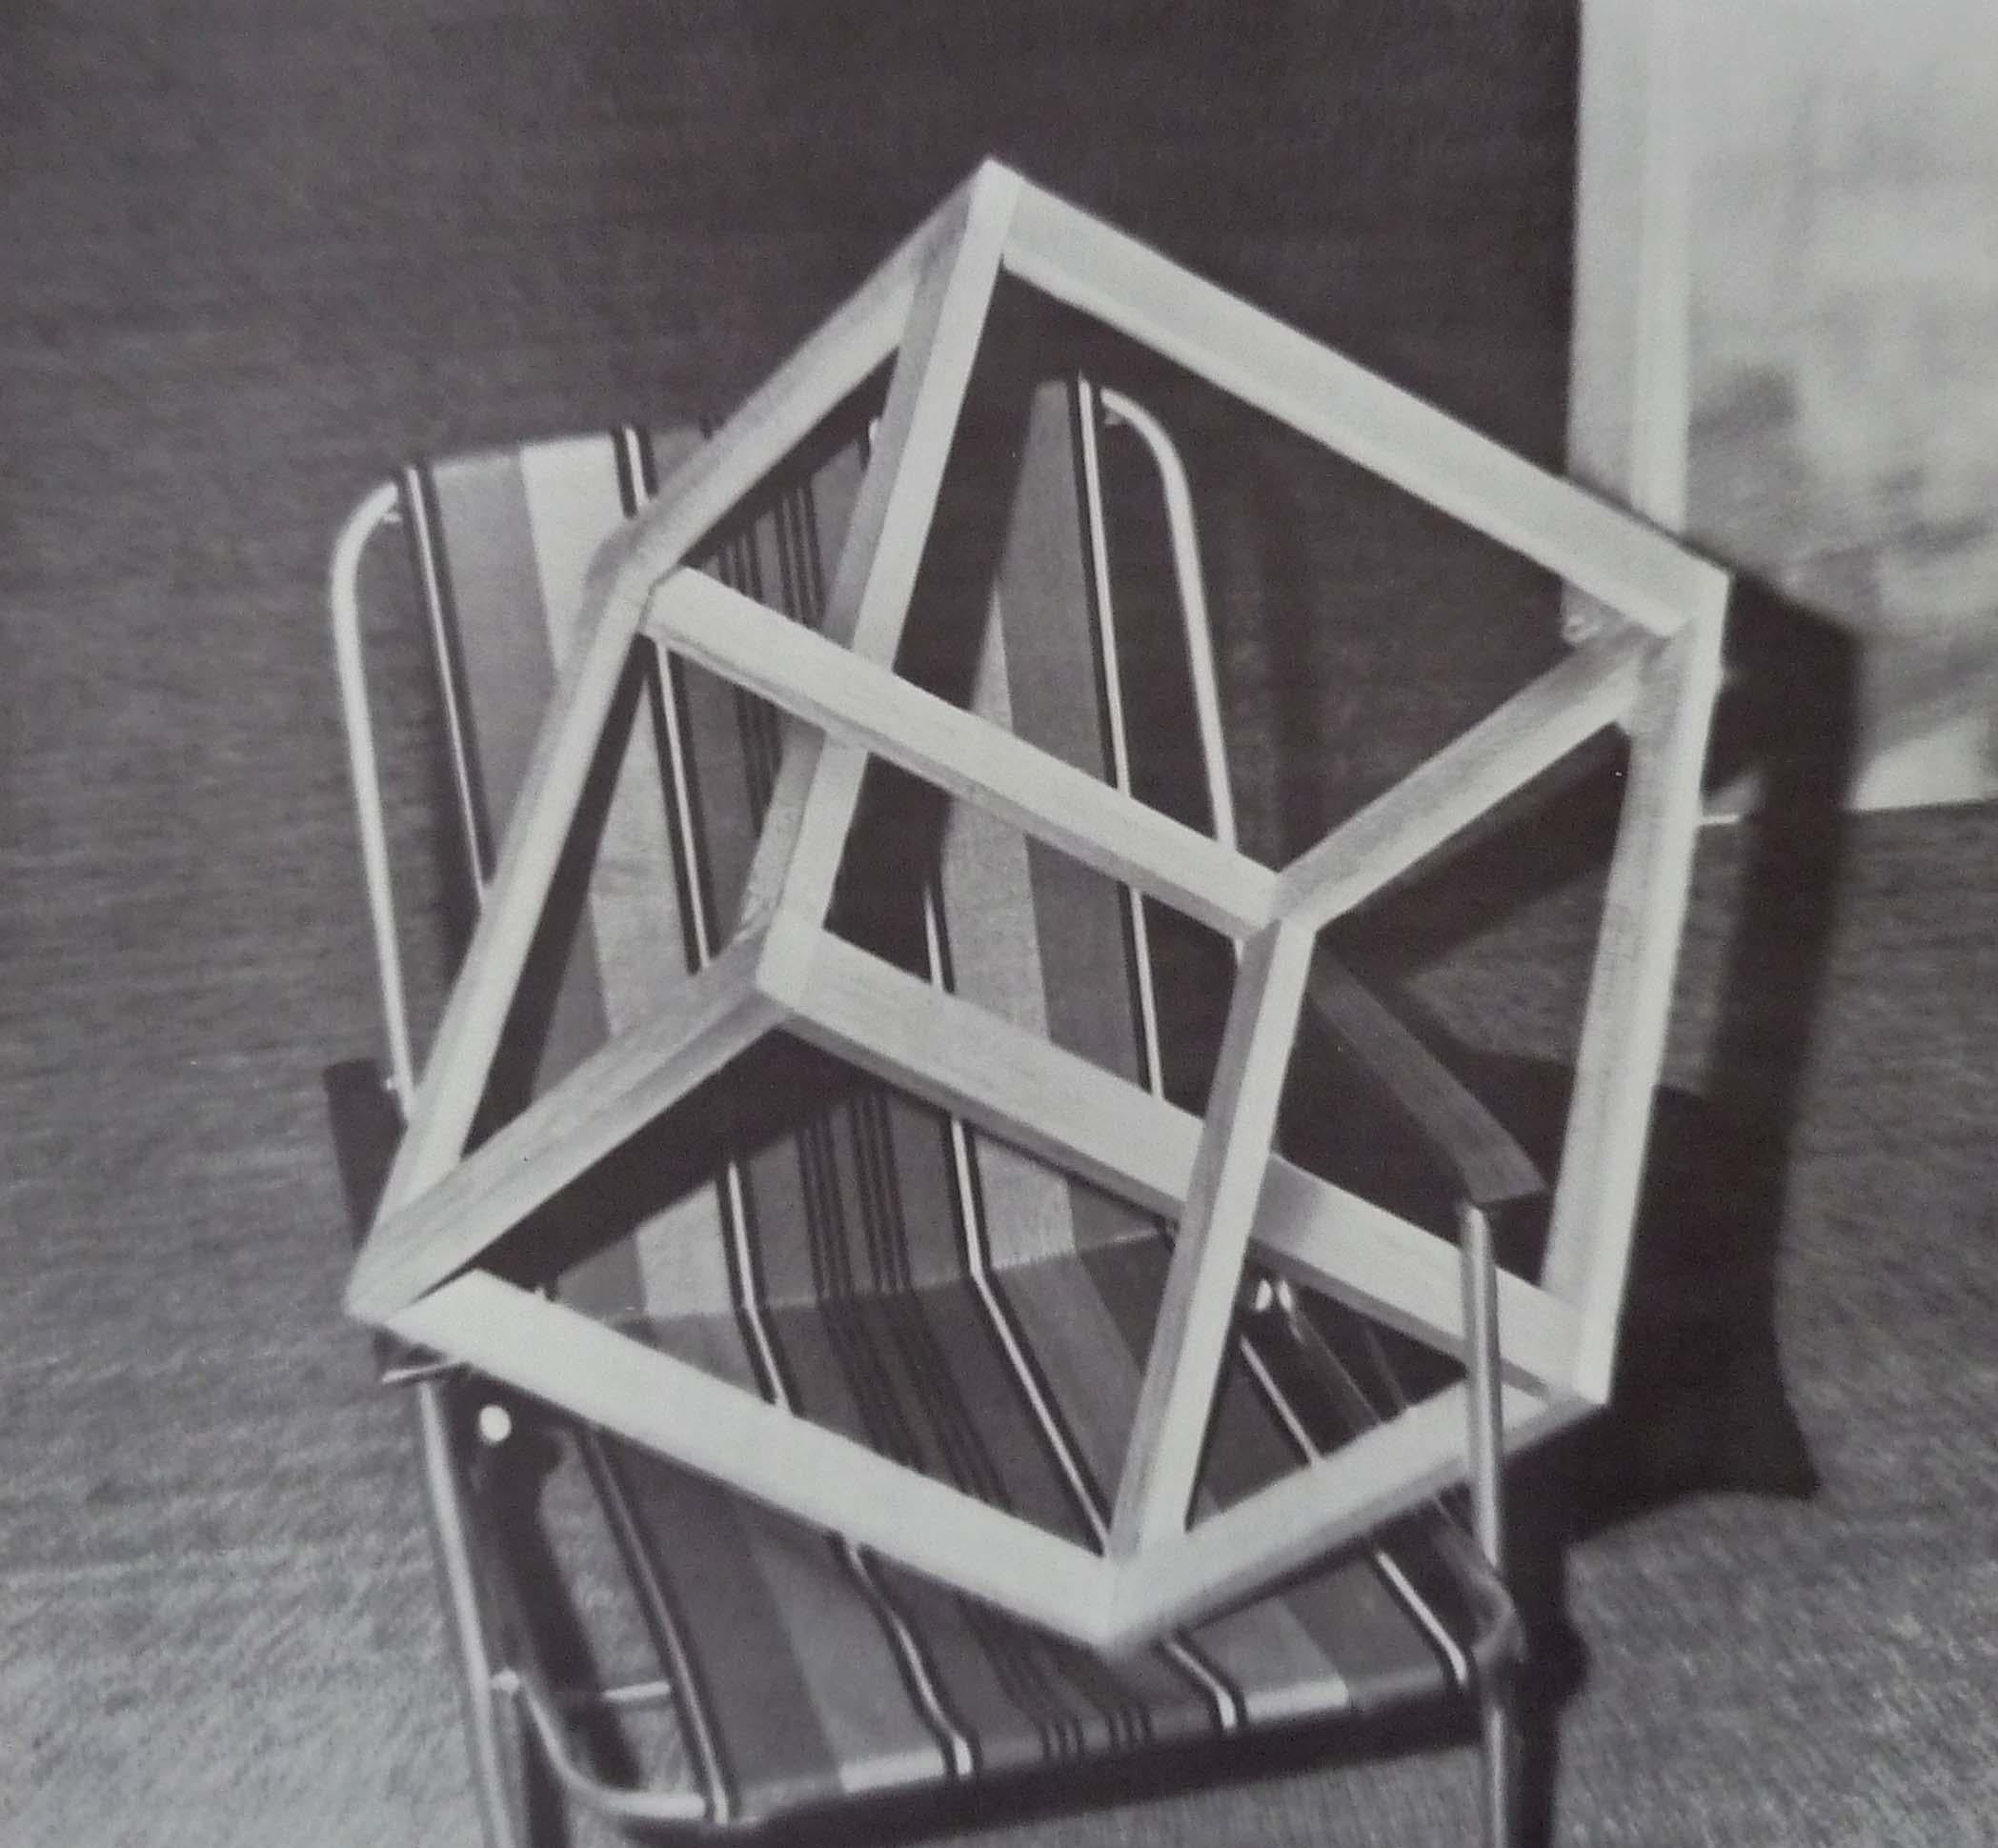 Gerhard Richter Abstract Print - Cube on Lawn Chair, from: Nine Objects - German Realism